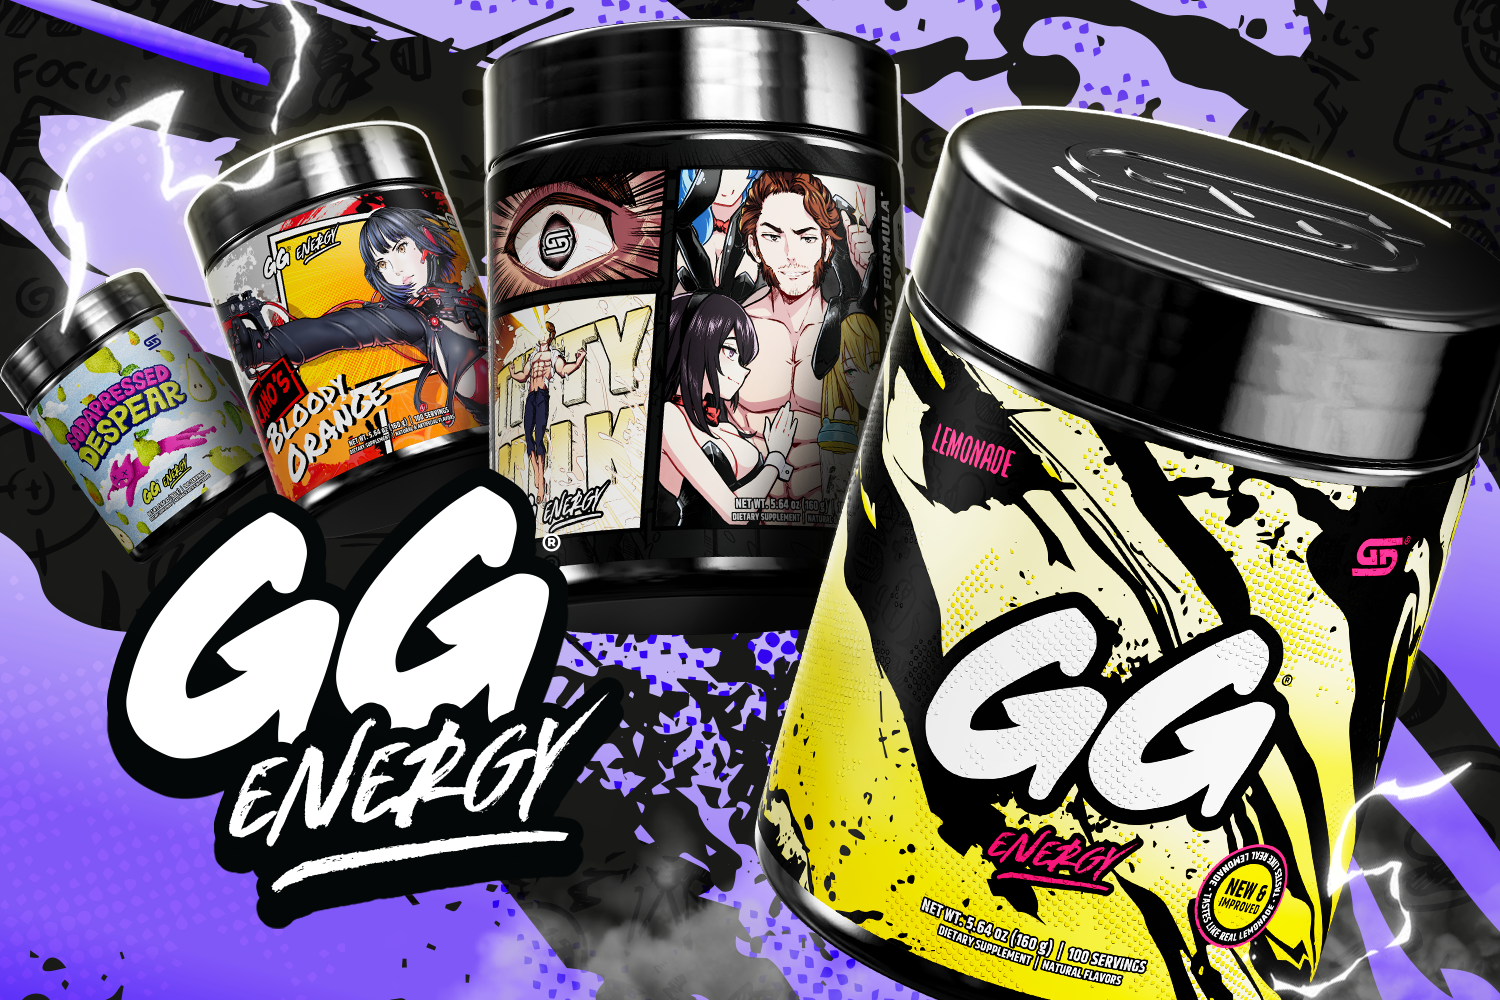 Gamer Supps Launches New Product, Propels AOV to 8.91%